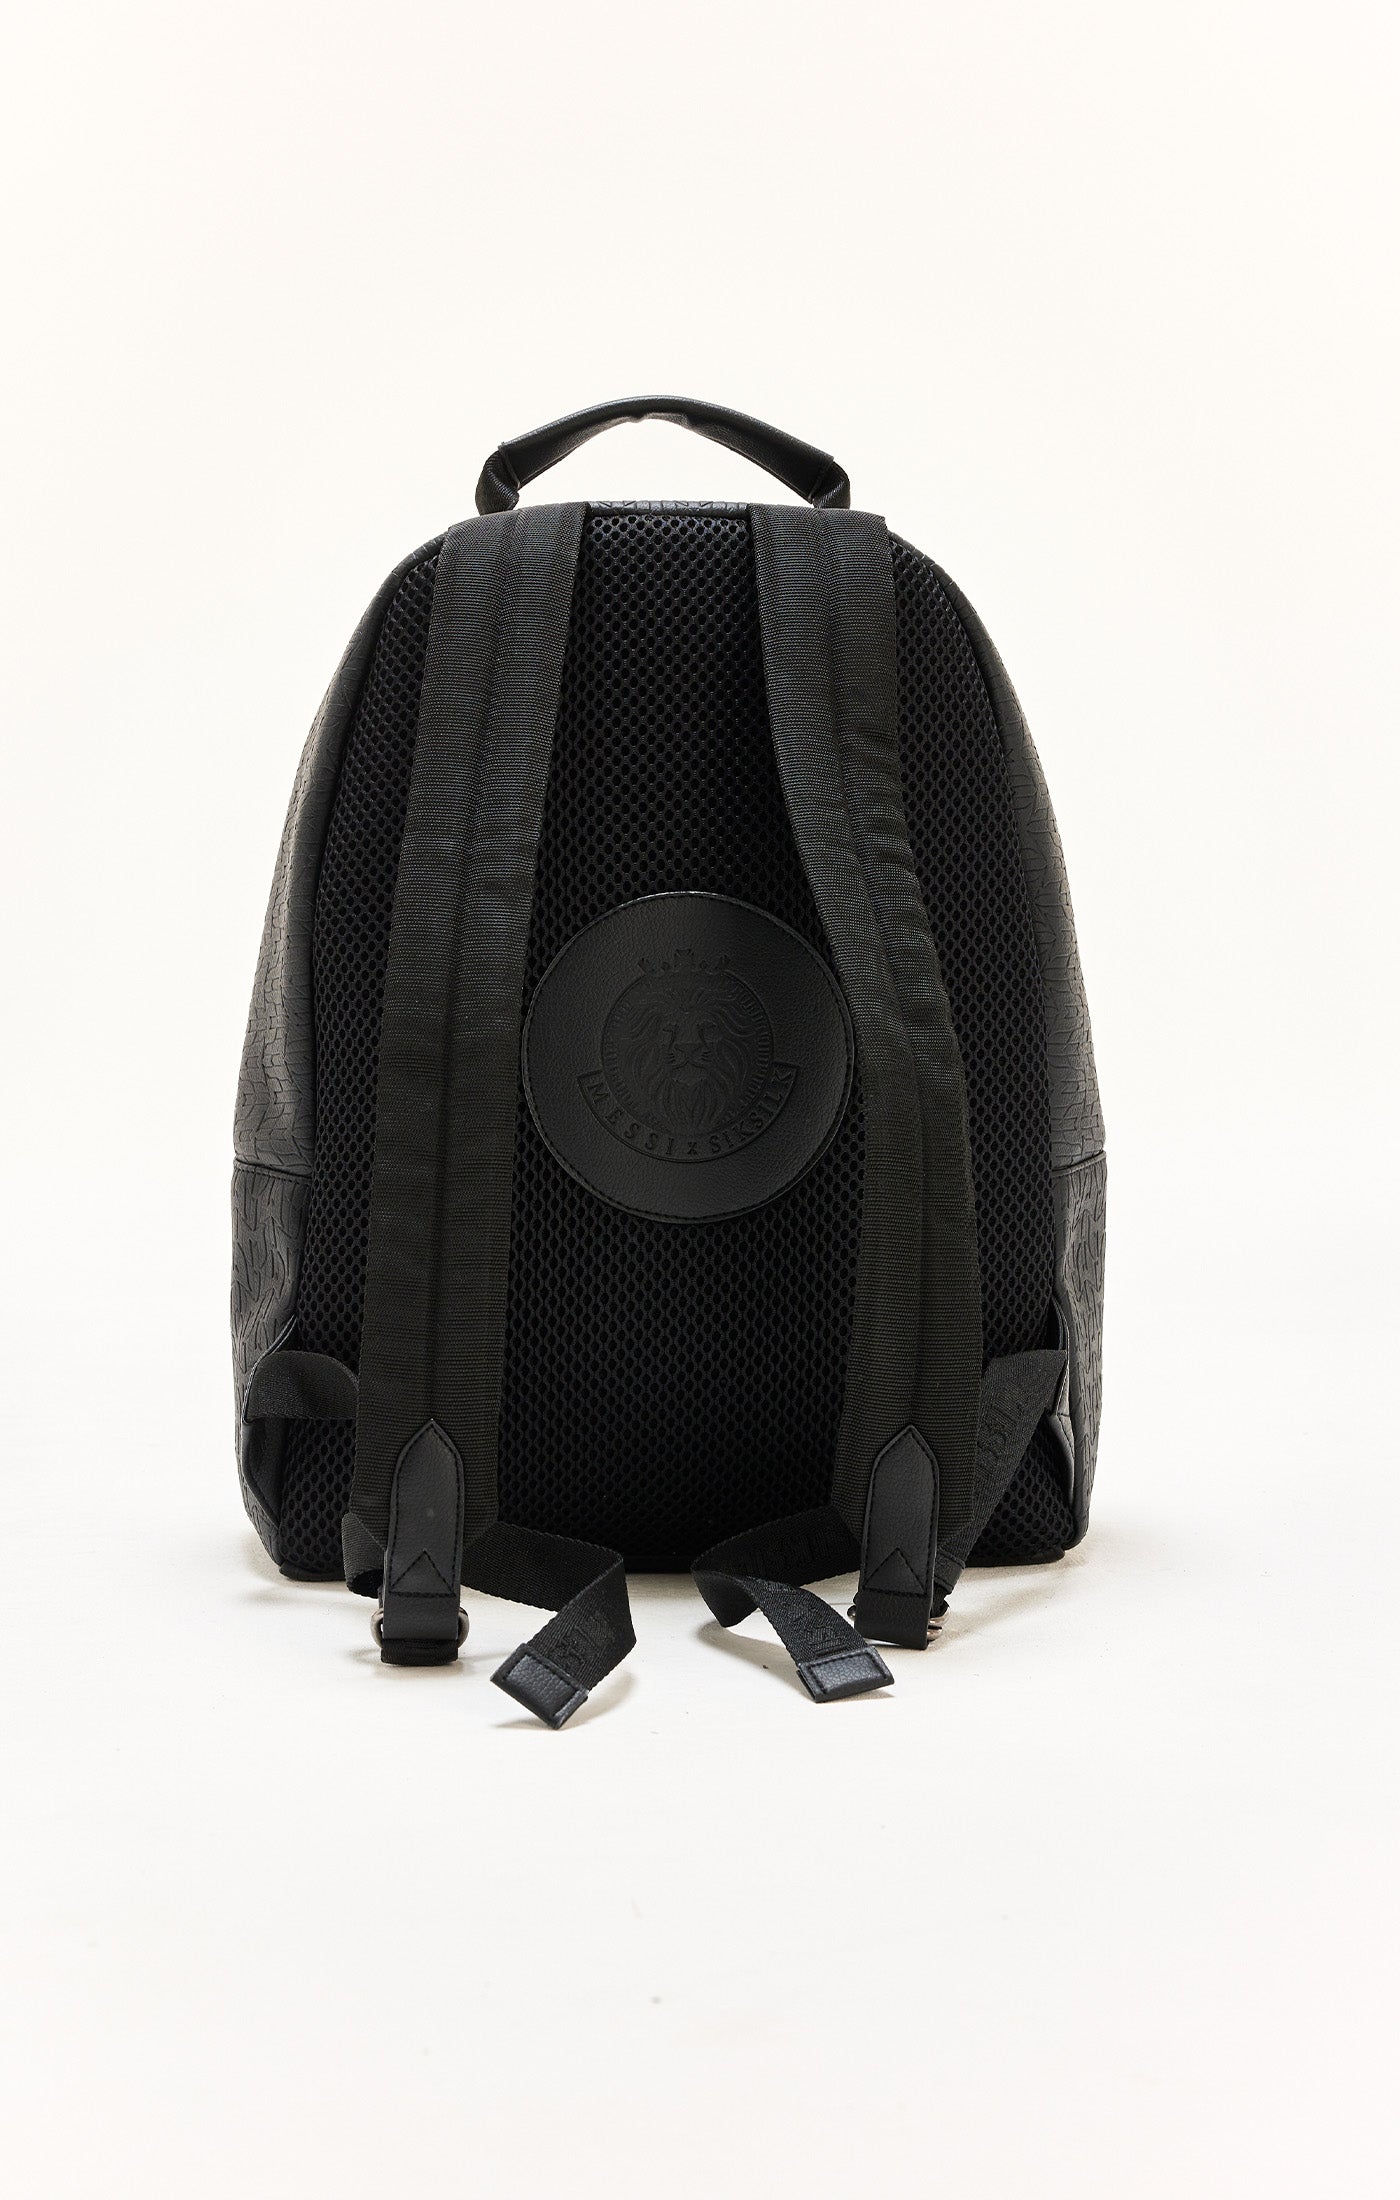 Load image into Gallery viewer, Messi x SikSilk Black Pu Branded Rucksack (3)